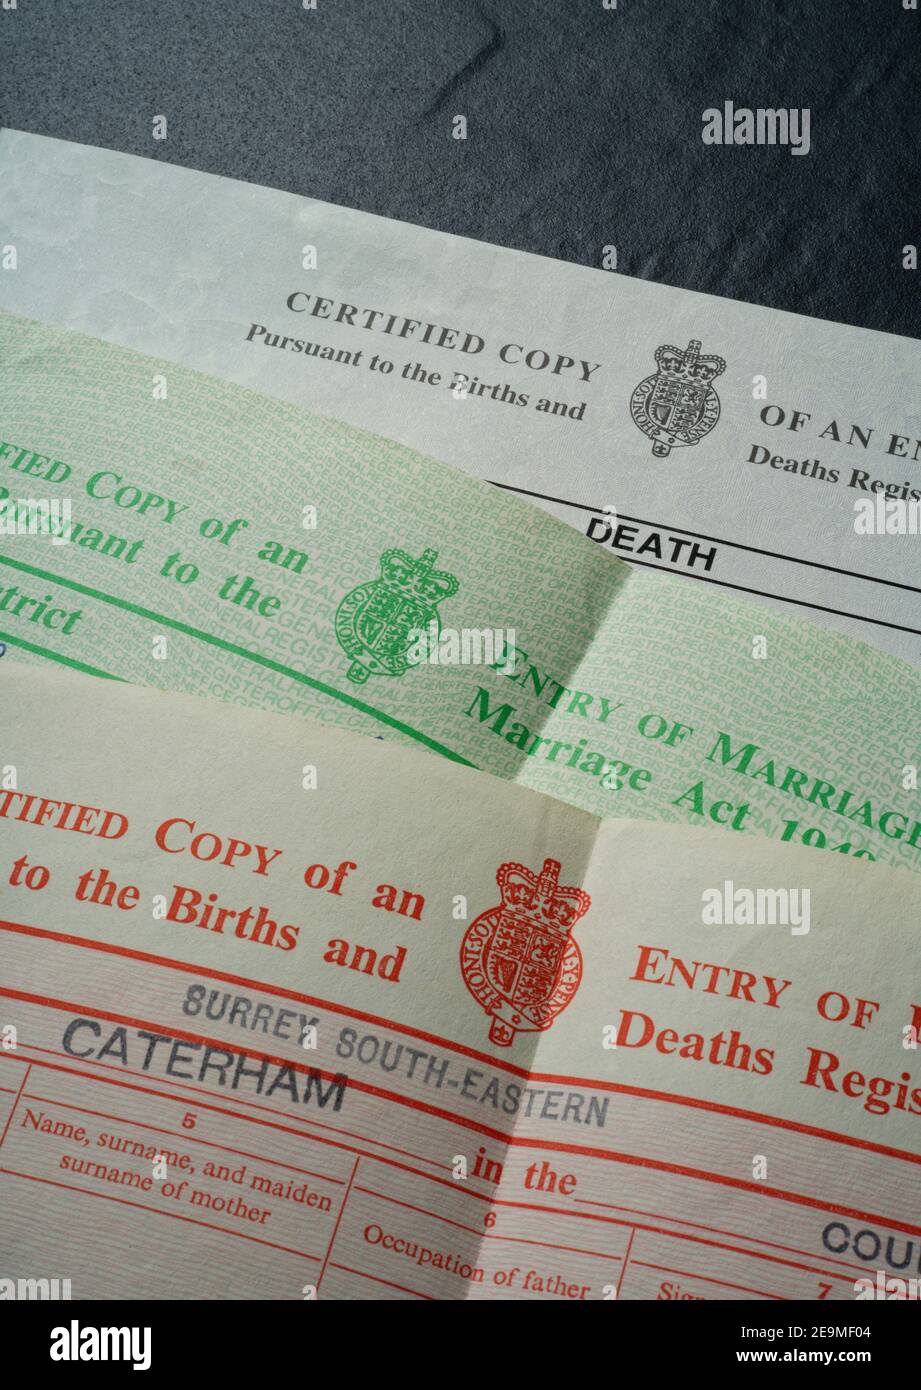 Birth, Marriage and Death certificates together. Official registration documents. Hatches, matches and dispatches. Stock Photo